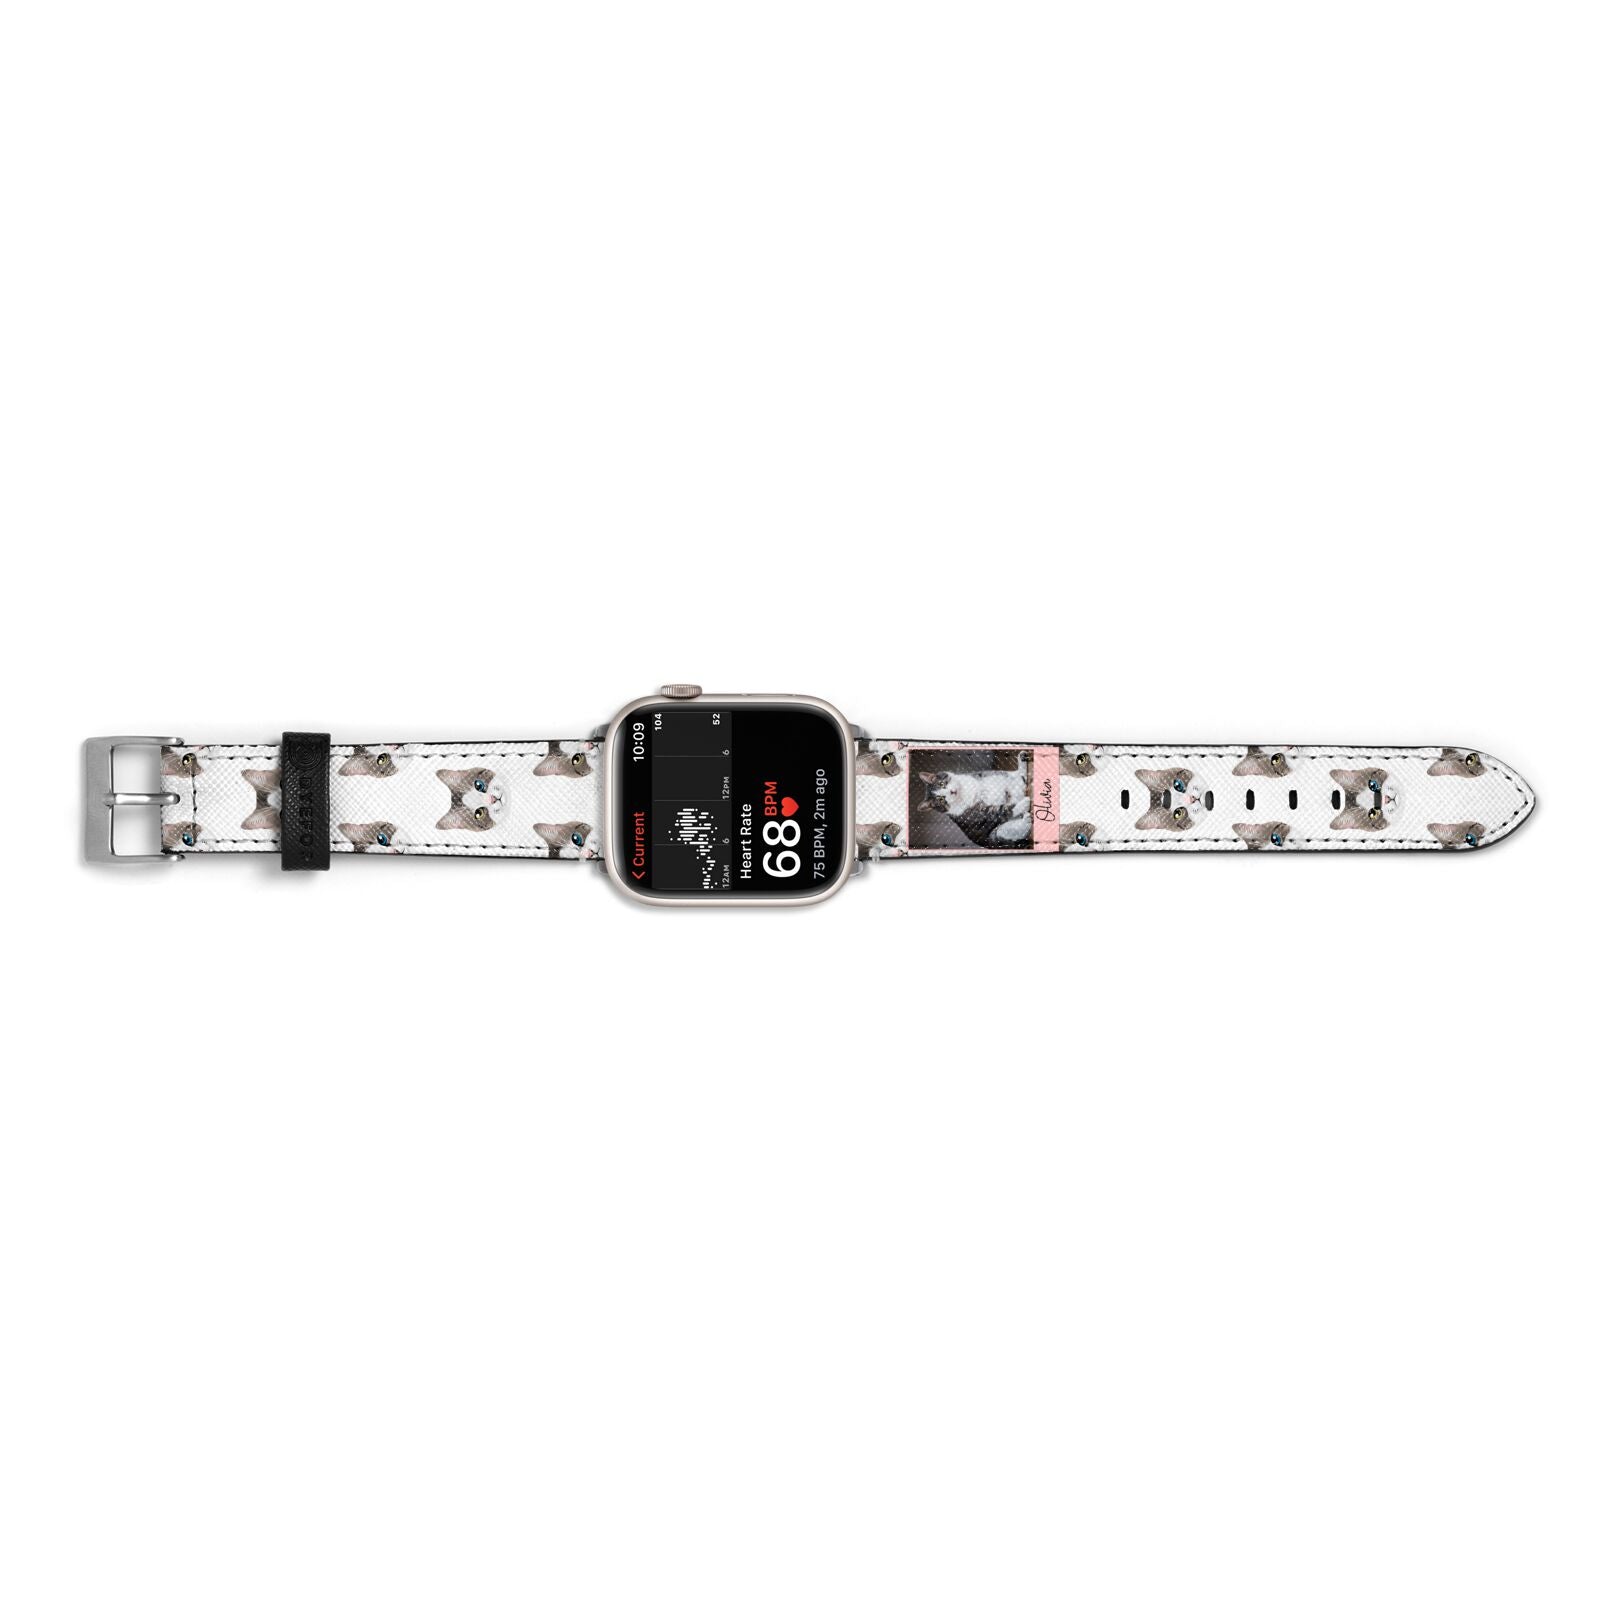 Personalised Cat Photo Apple Watch Strap Size 38mm Landscape Image Silver Hardware